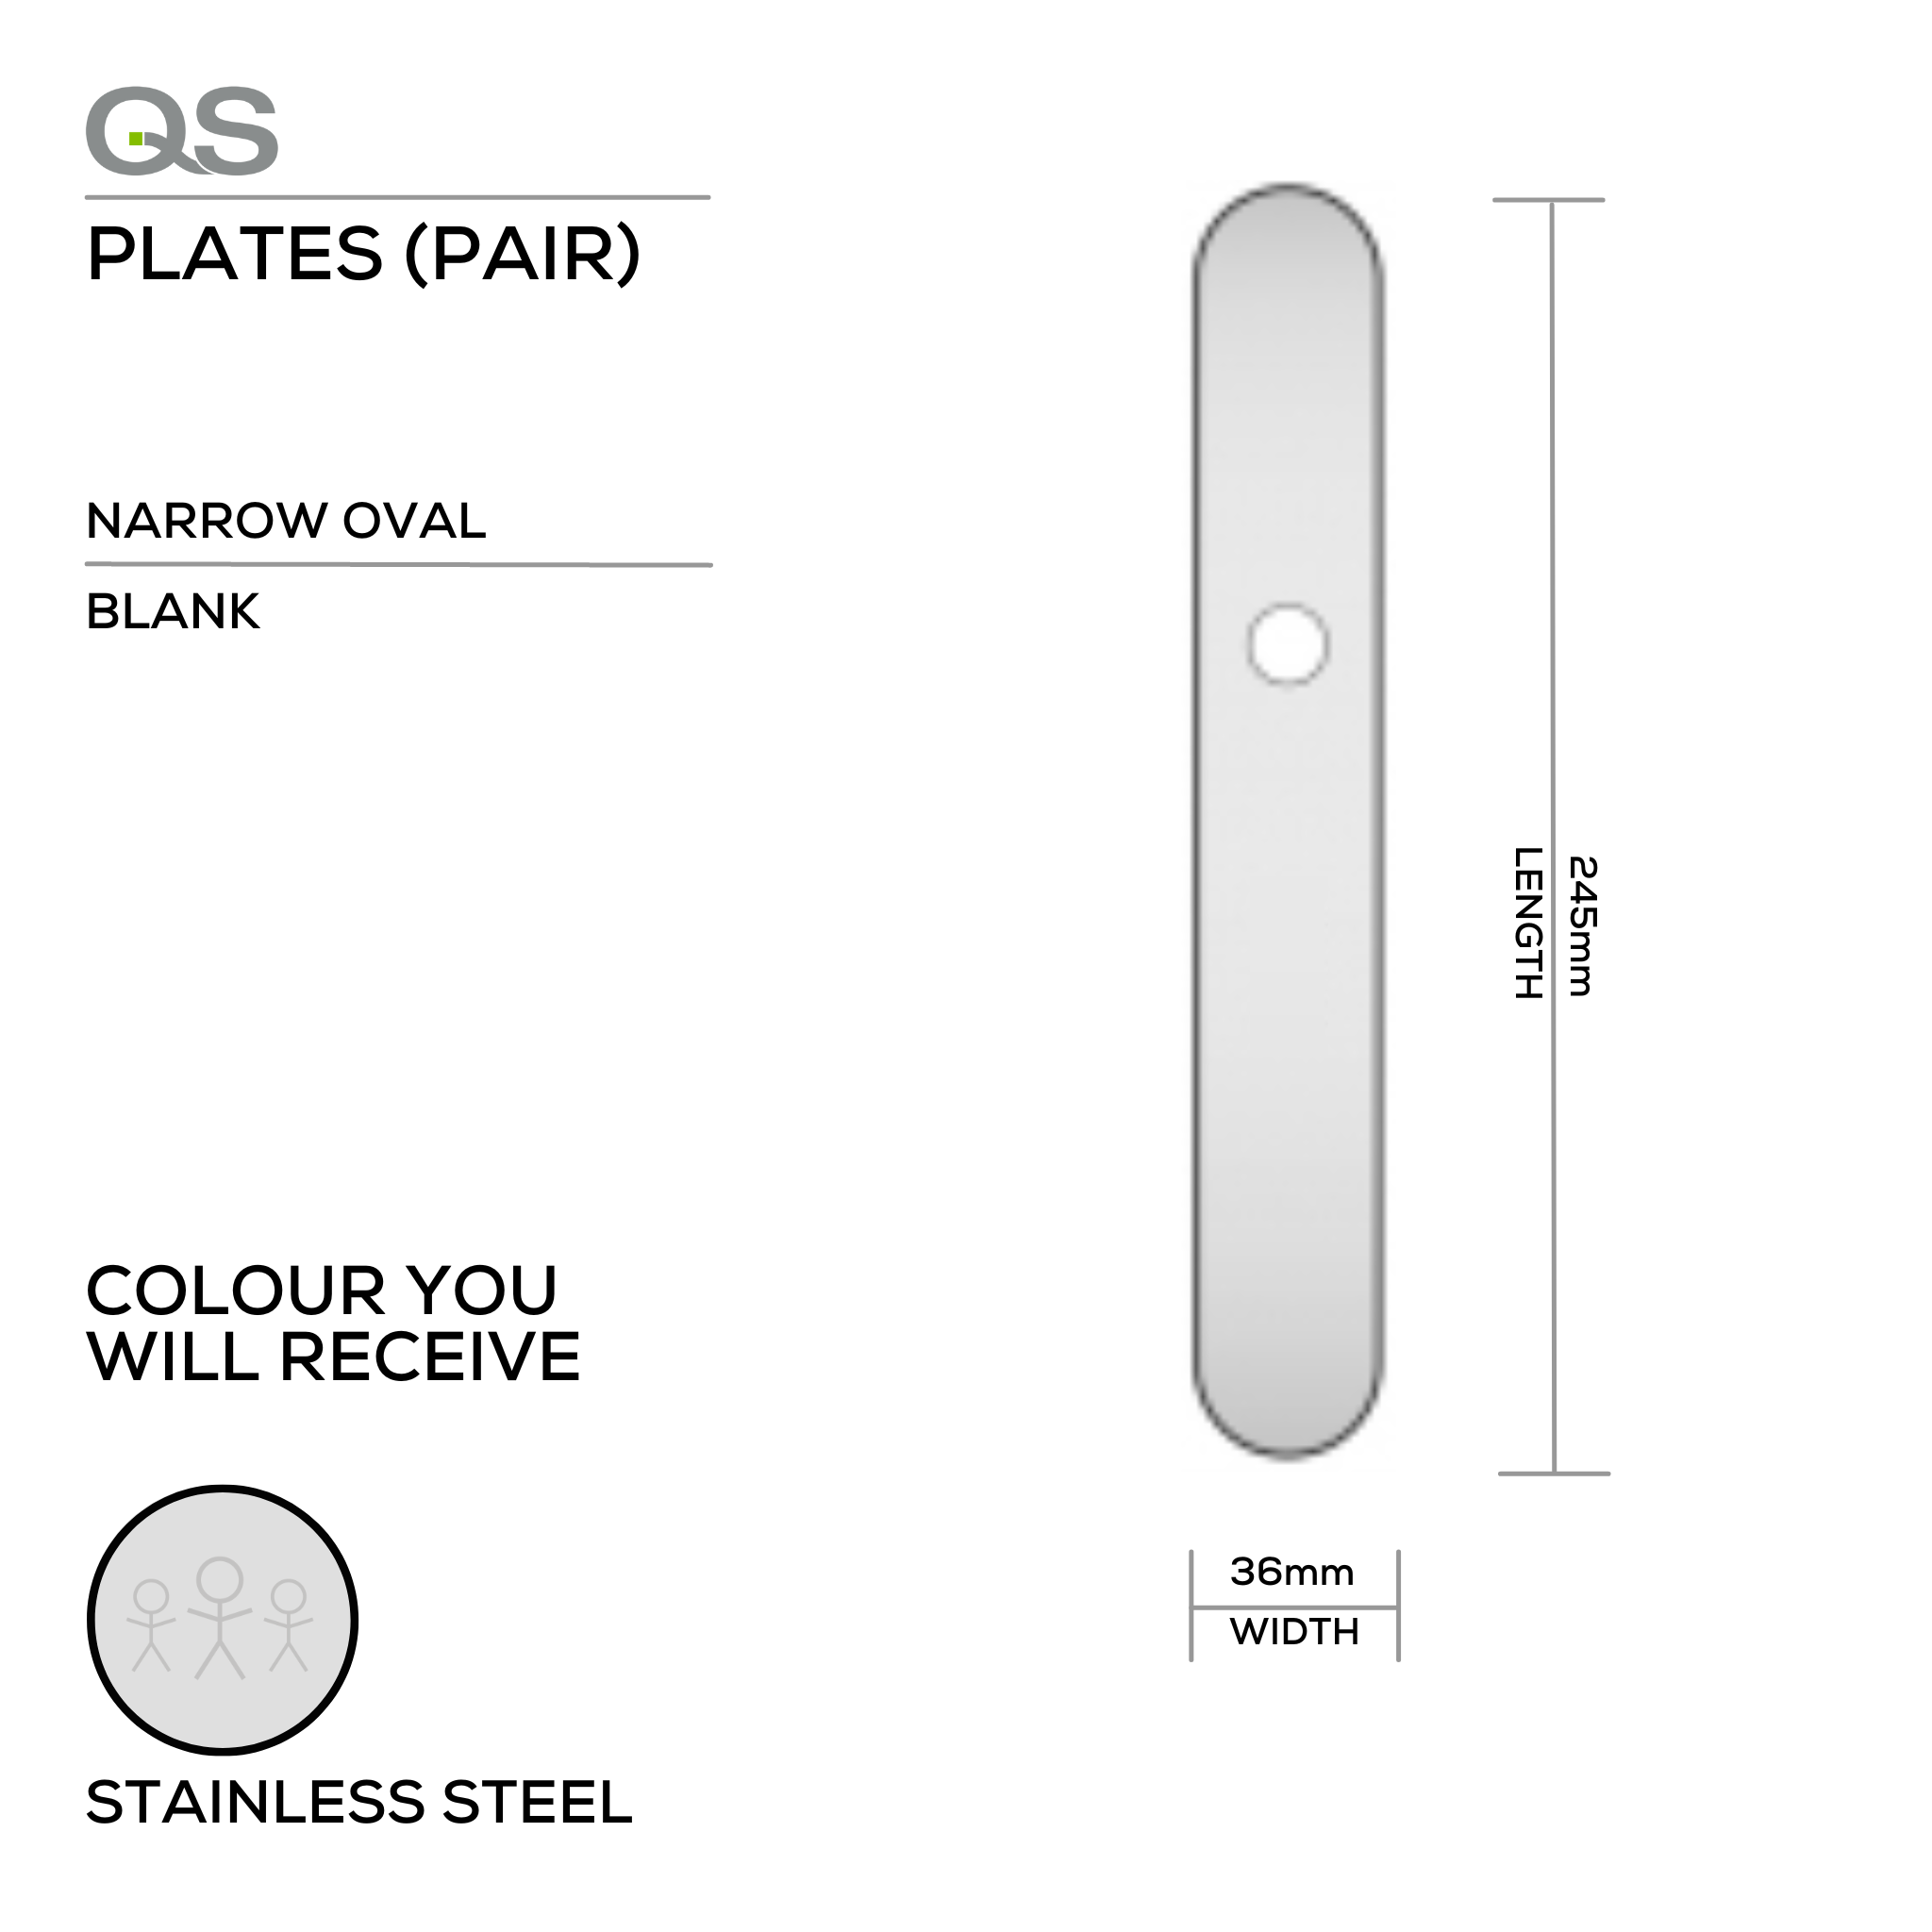 QS4483 BLANK, Plate, Narrow Oval, 245mm (l) x 36mm (w), Supplied without QS Handle, Stainless Steel, QS